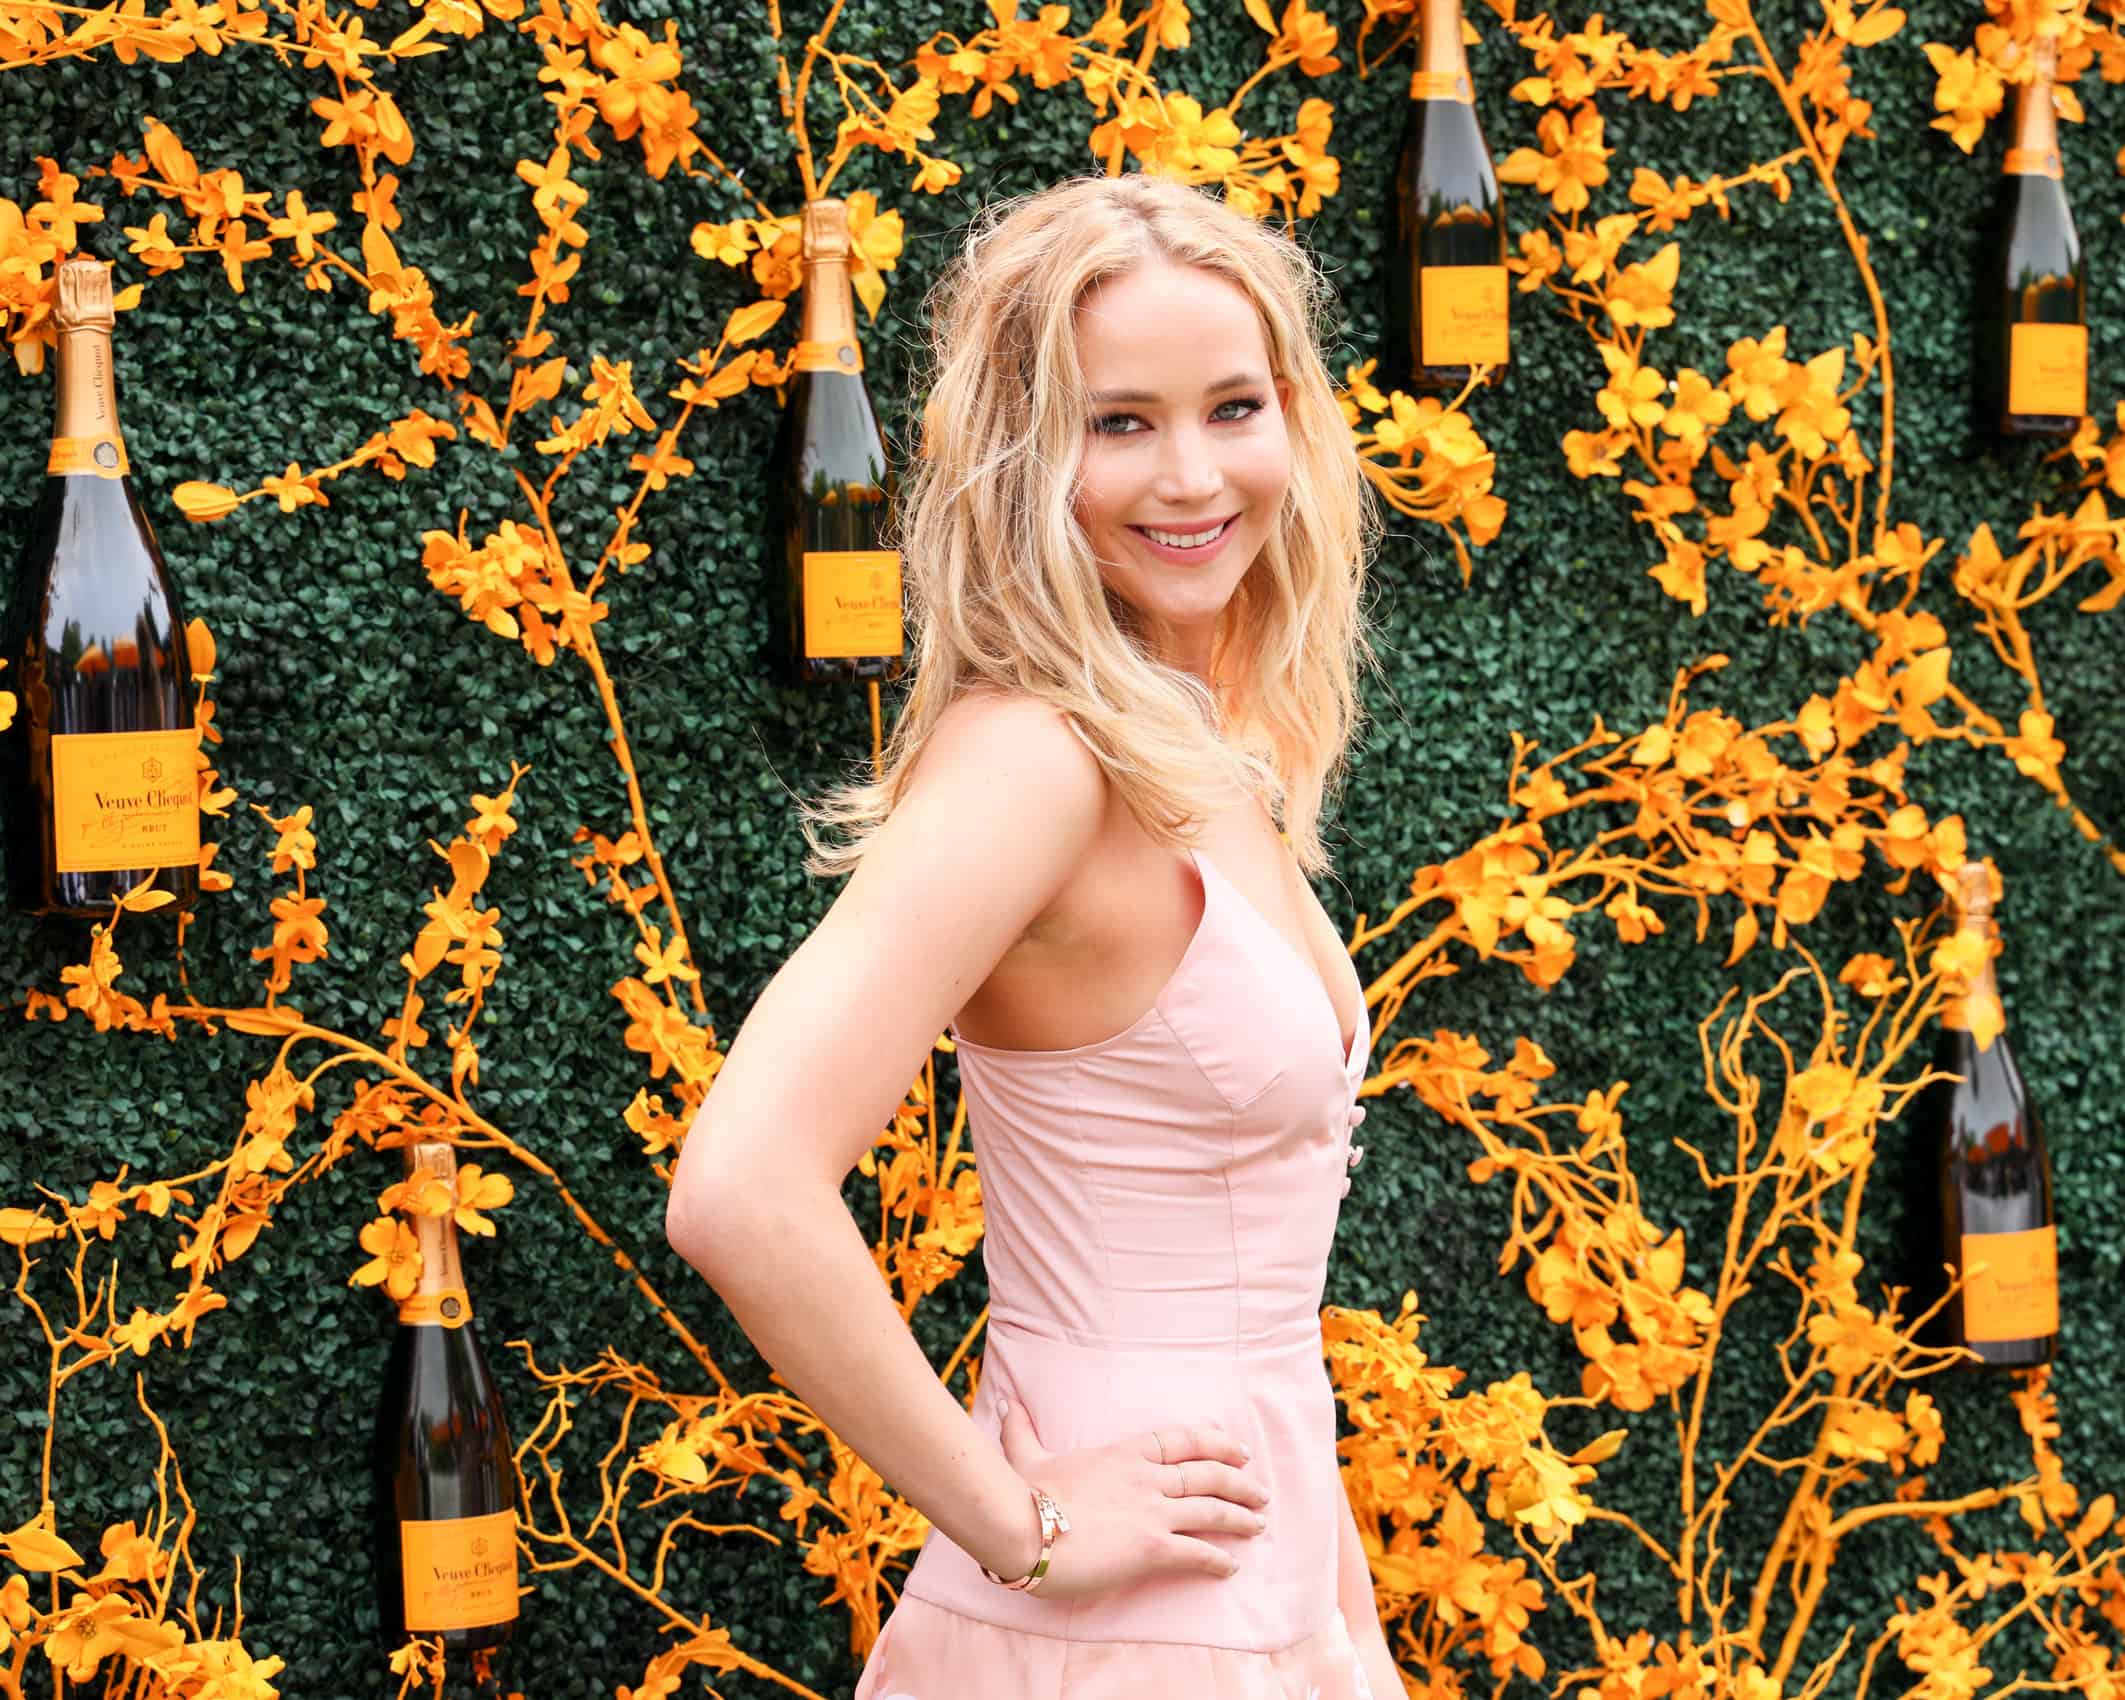 Veuve Clicquot's Polo Classic Brought Out the Fashion! - Daily Front Row